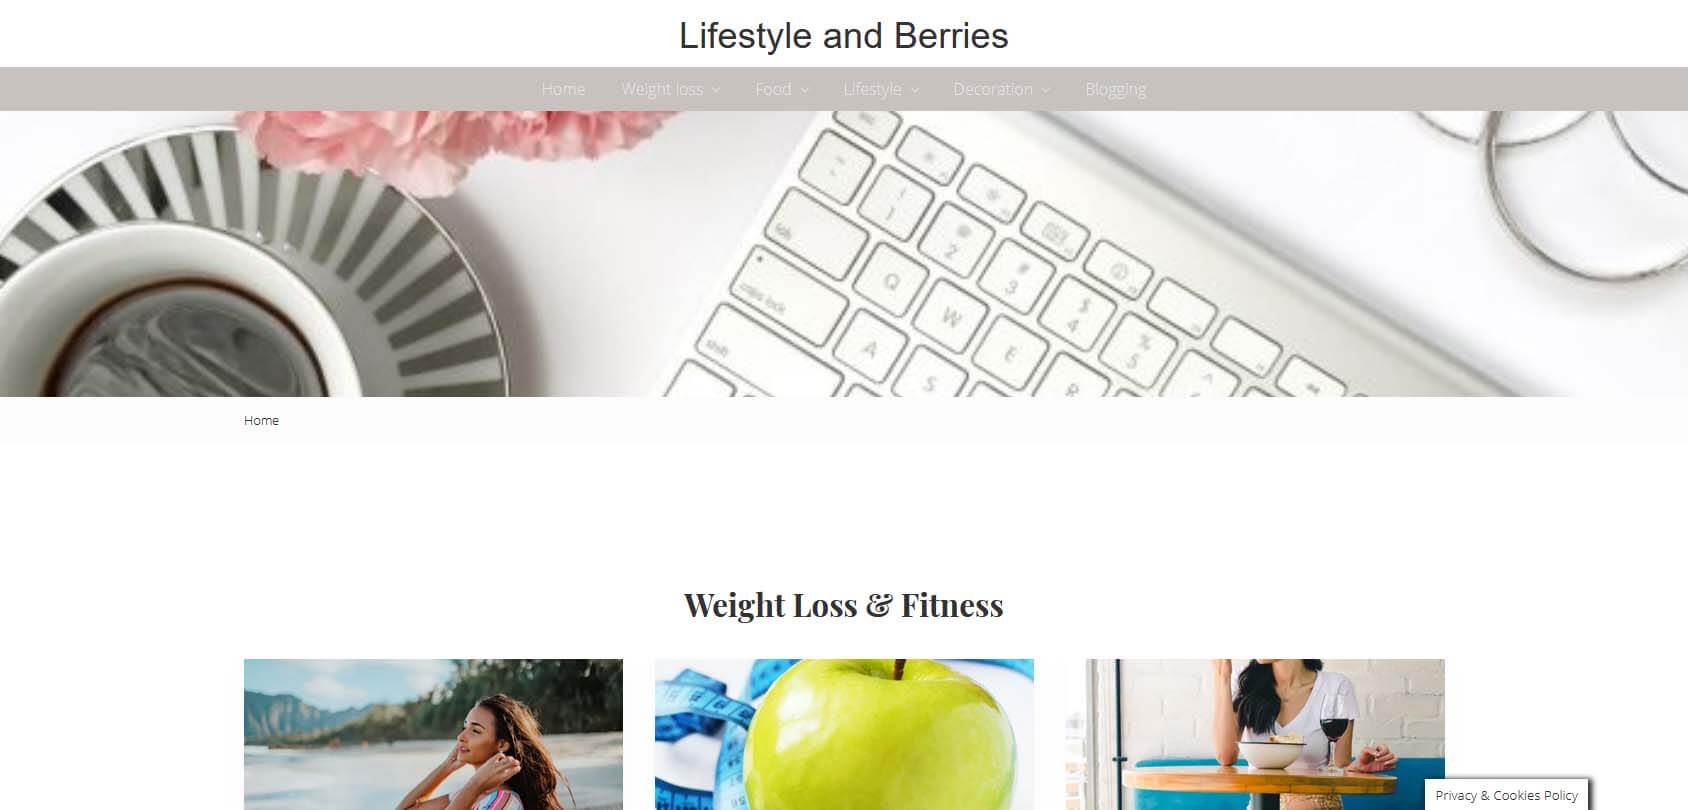 Lifestyle and Berries Homepage